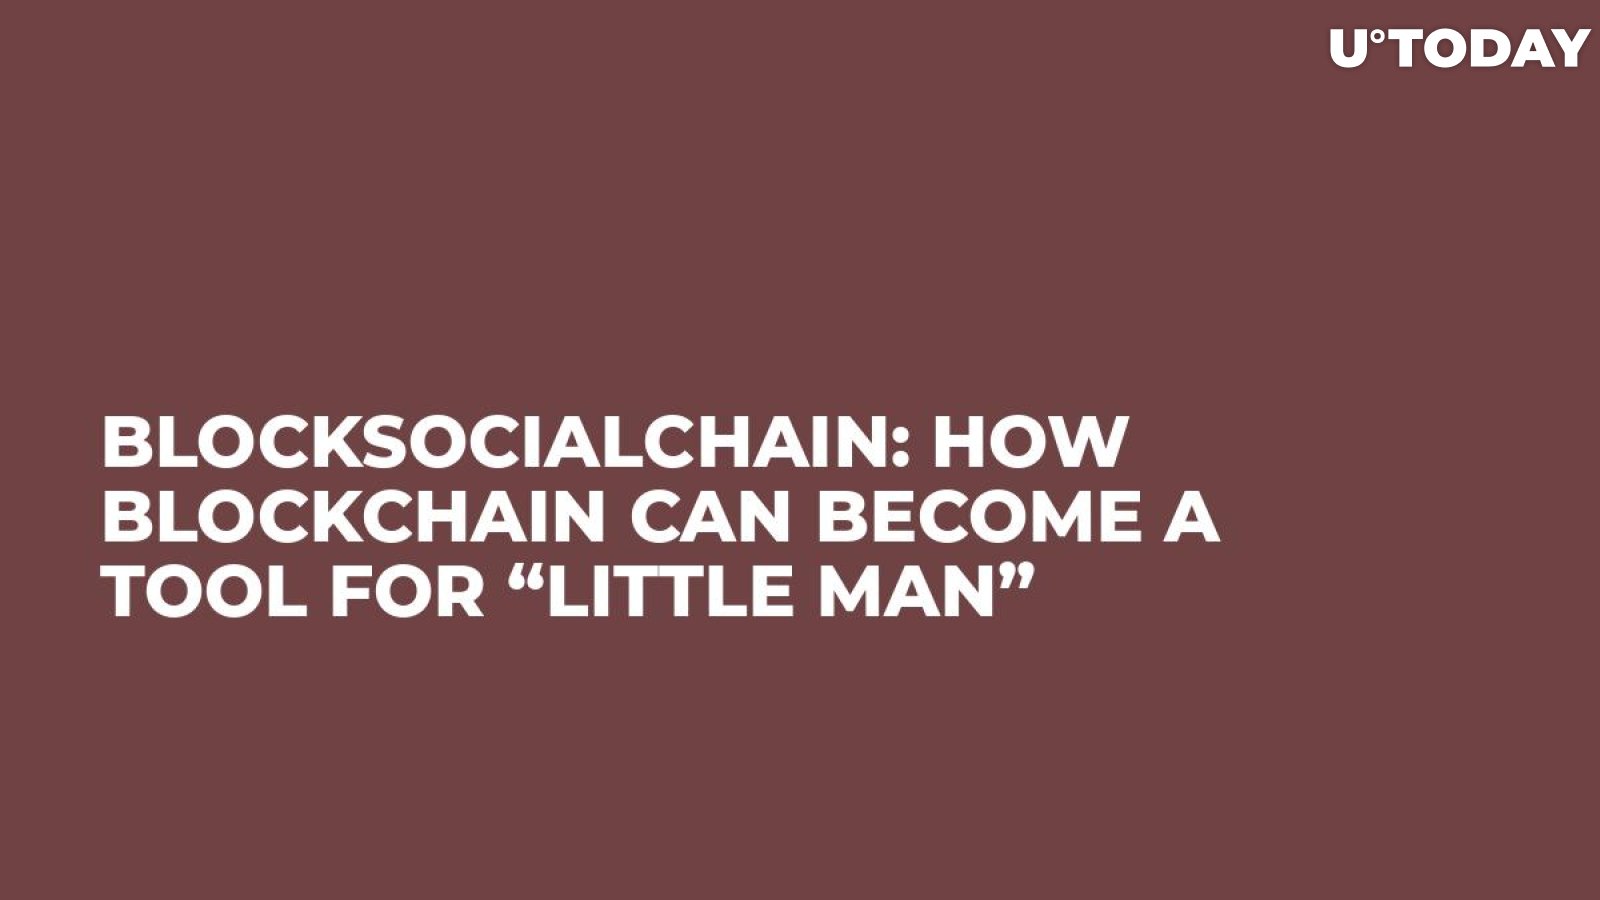 BlockSocialChain: How Blockchain Can Become a Tool for “Little Man”